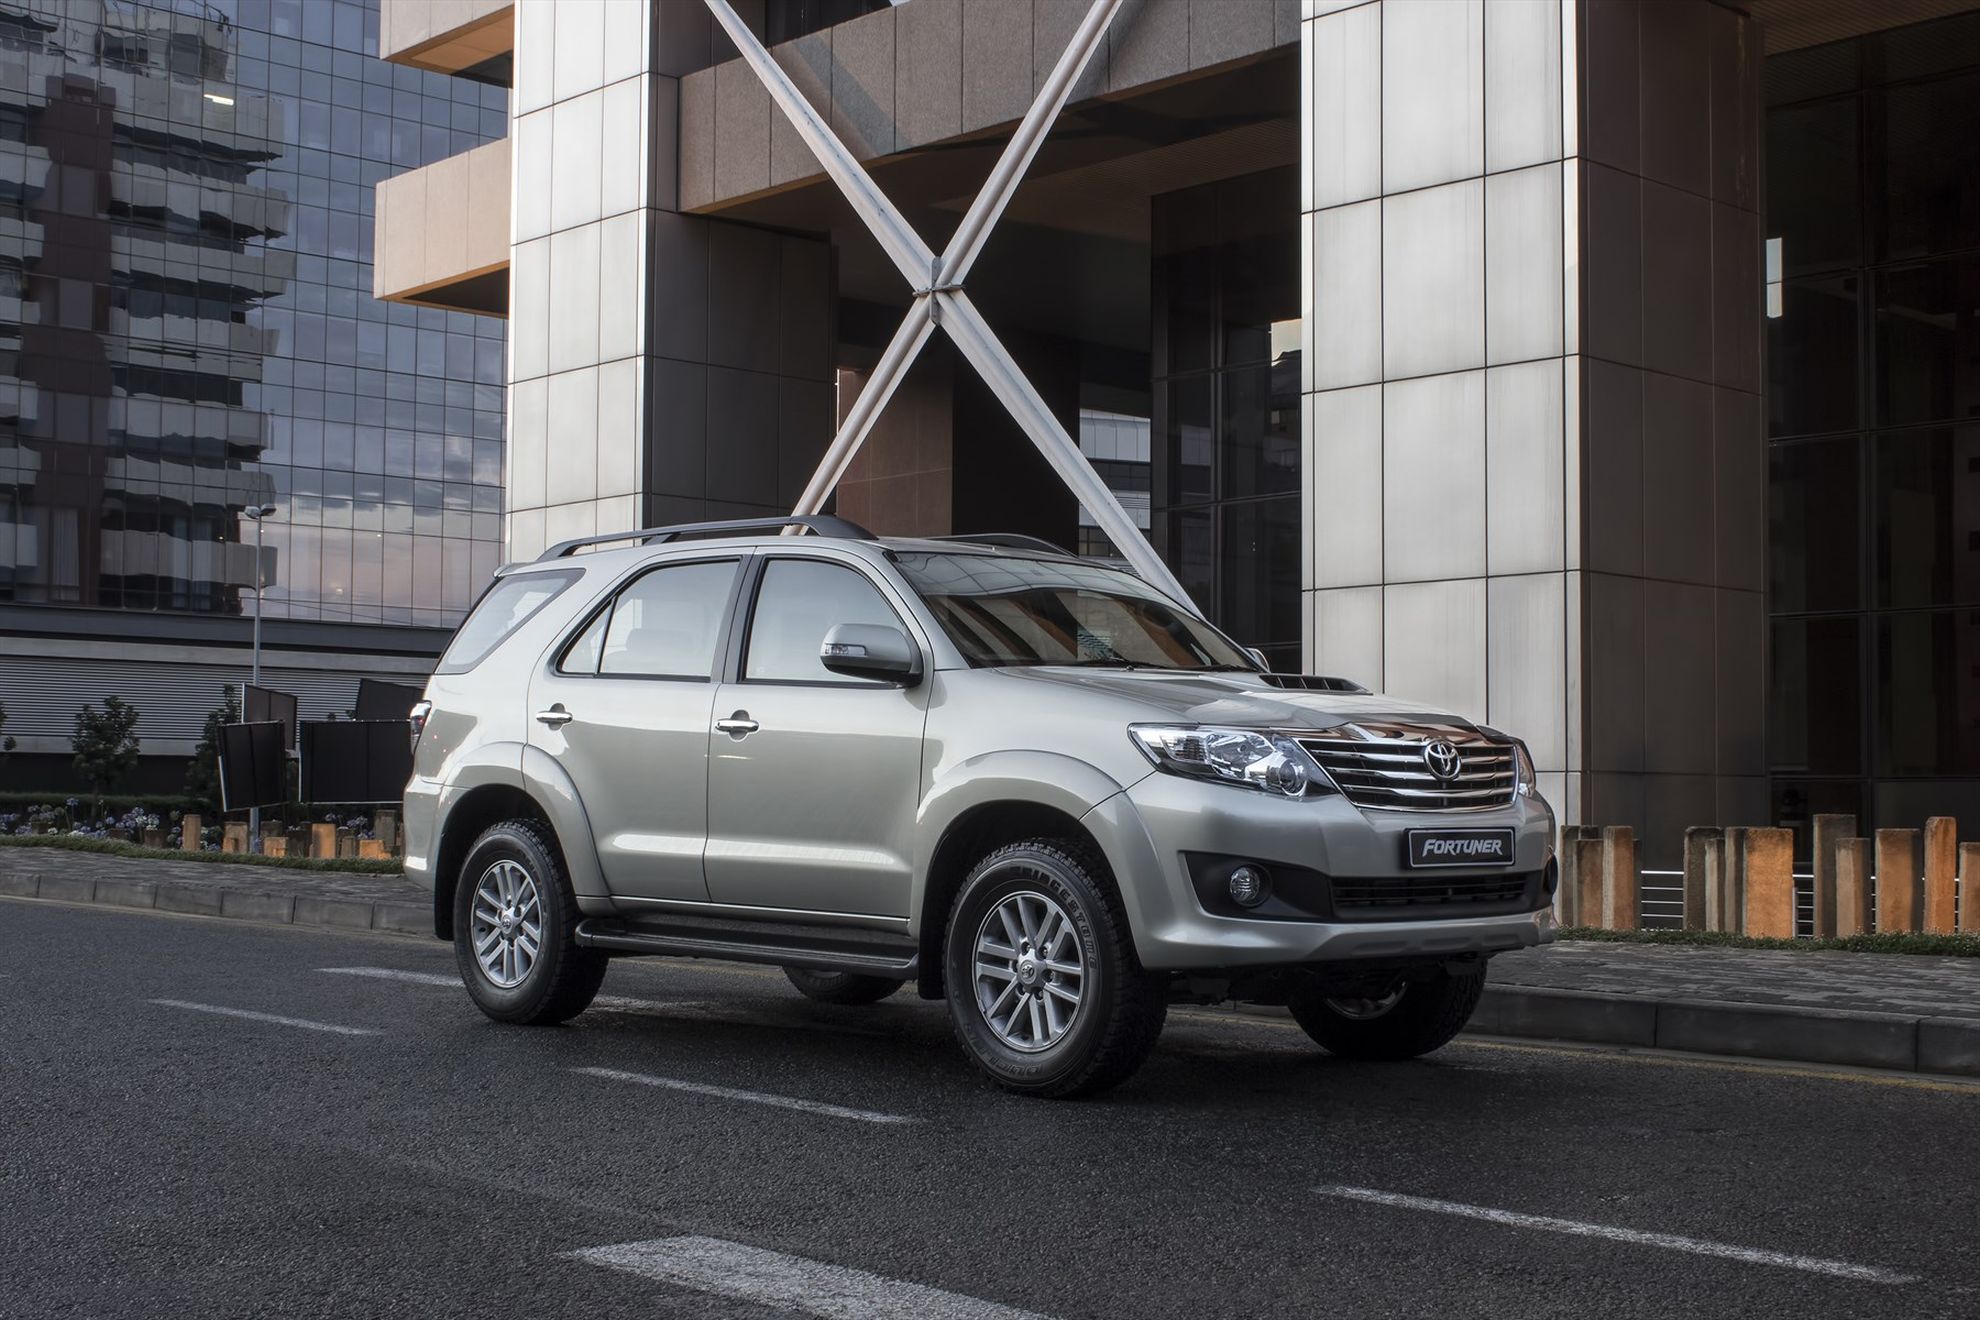 JUNE NAAMSA SALES: TOYOTA REMAINS NUMBER ONE